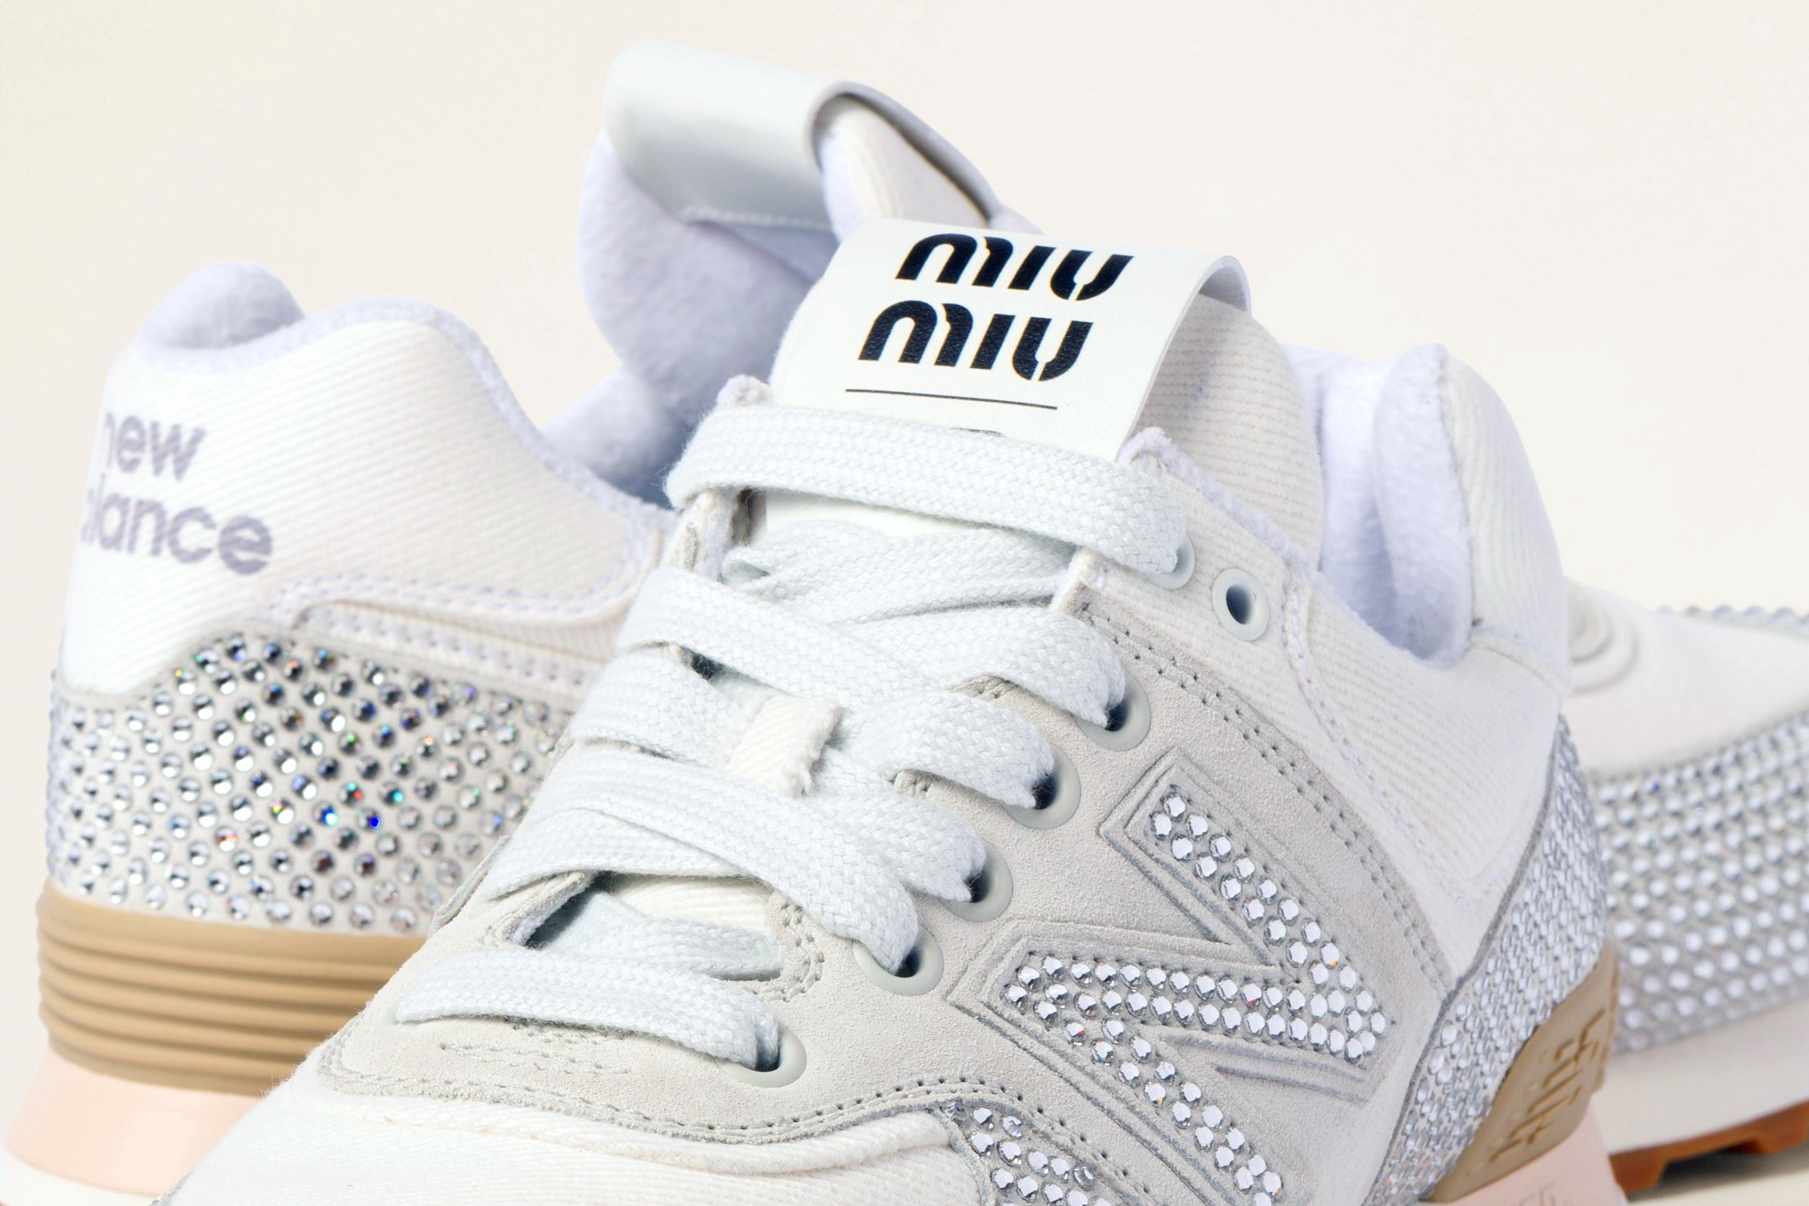 Miu Miu's New Balance 574 sneaker in white suede & denim with crystals